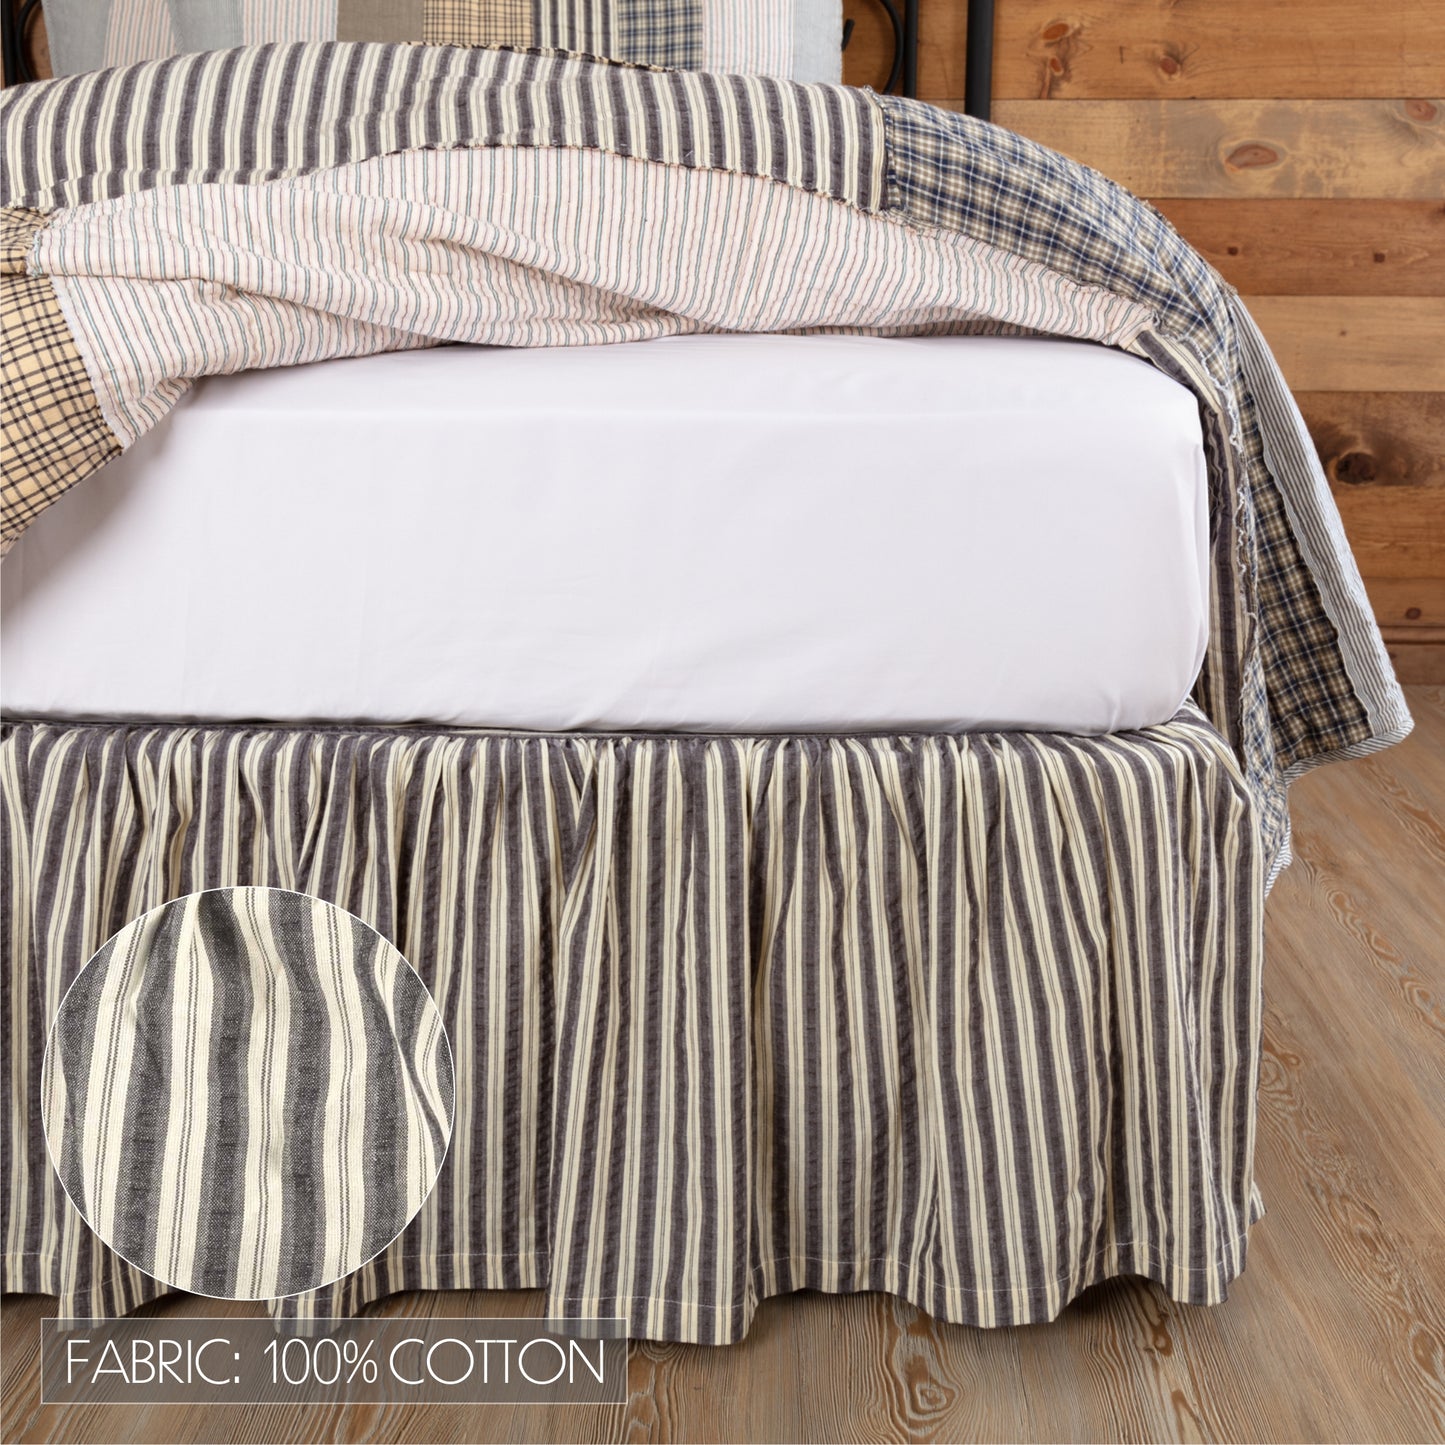 23364-Ashmont-Twin-Bed-Skirt-39x76x16-image-2